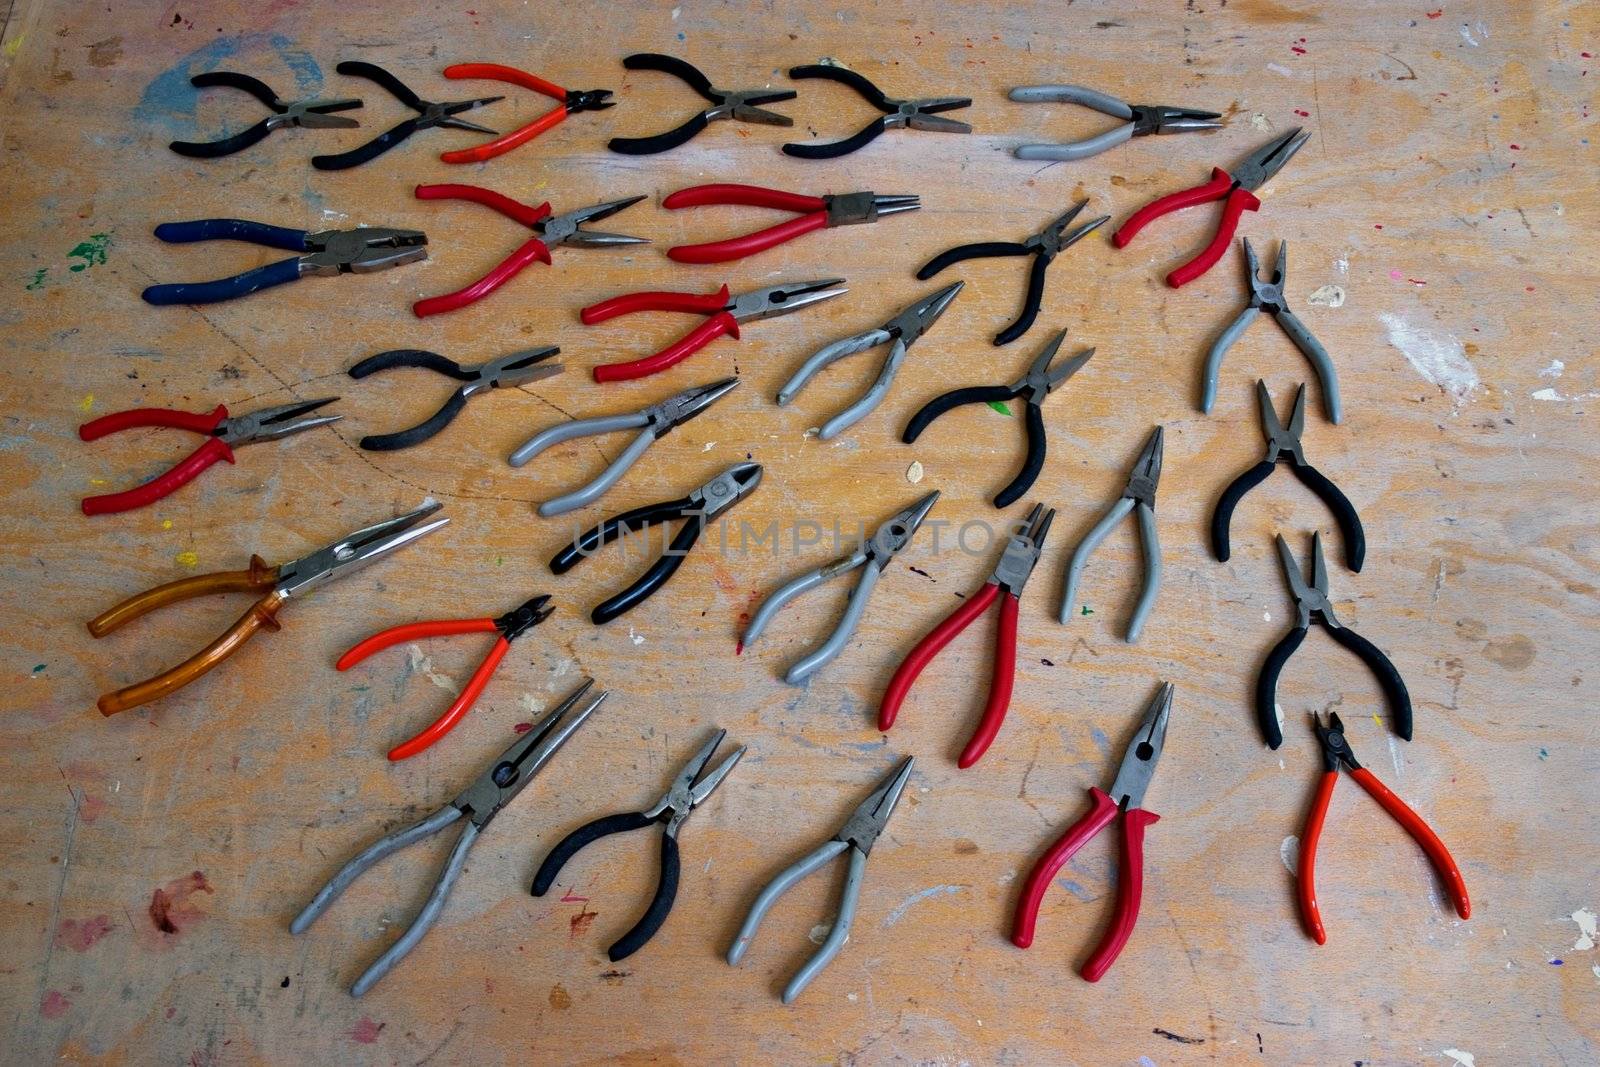 Several shapes and sizes of pliers on a work bench